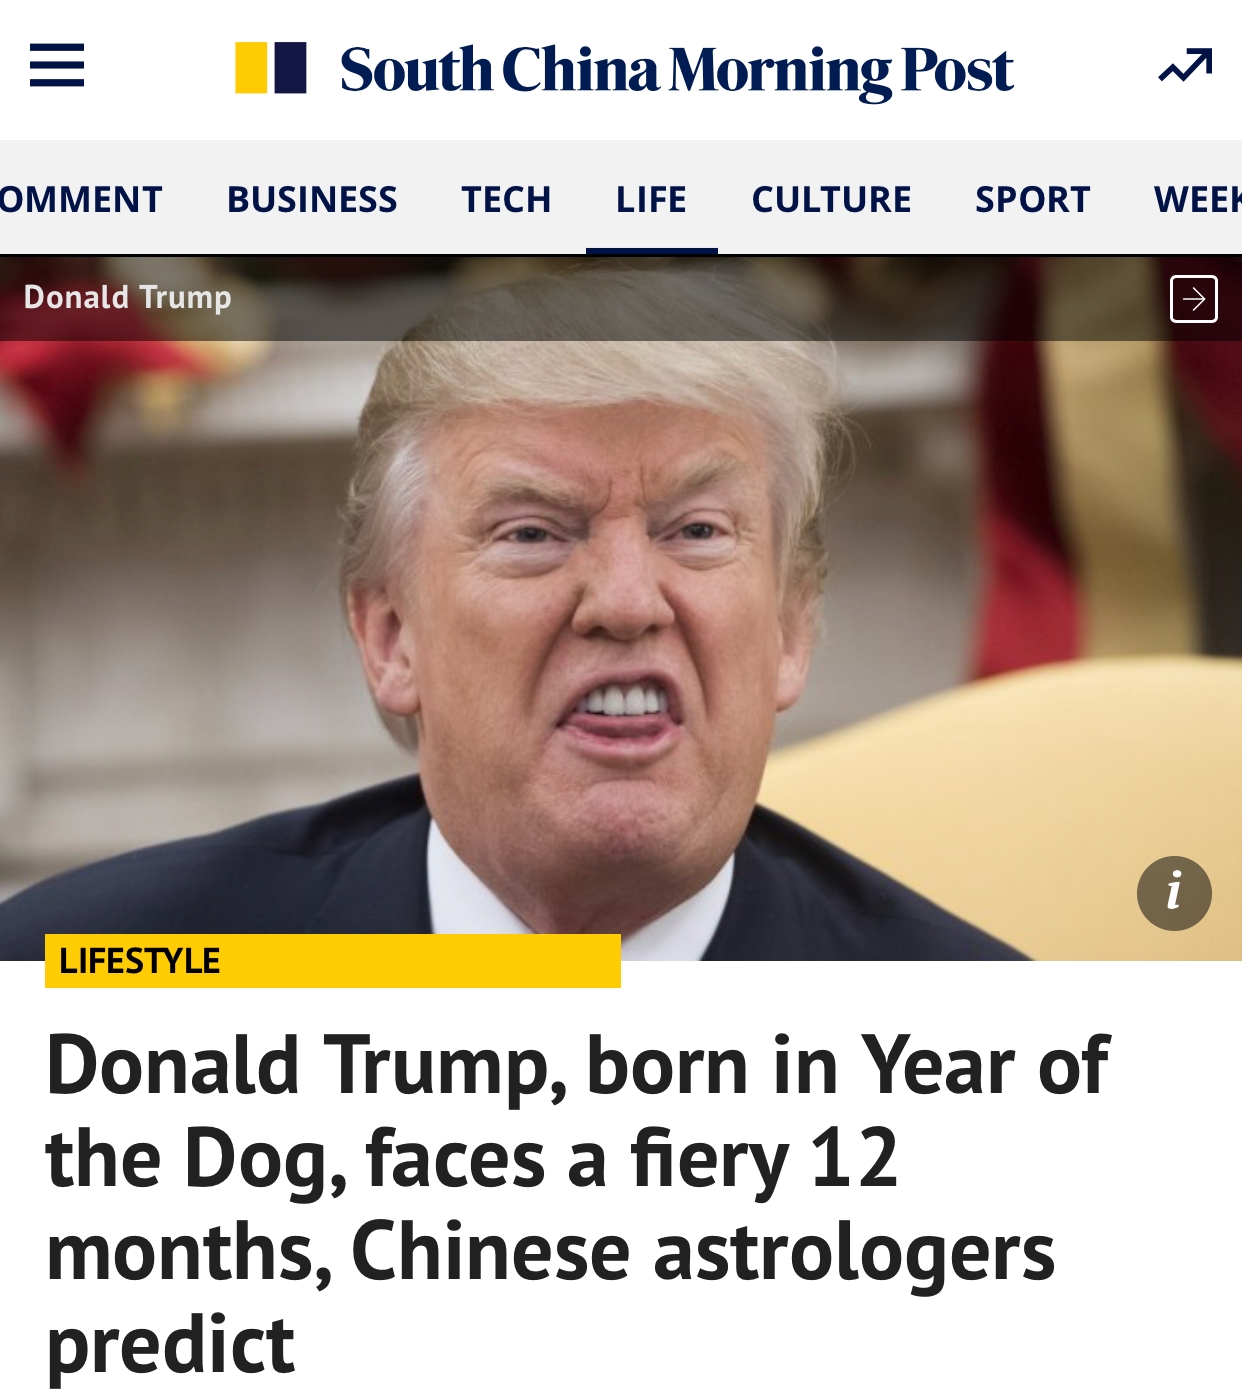 Interview with SCMP on Donald Trump and Year of the Dog